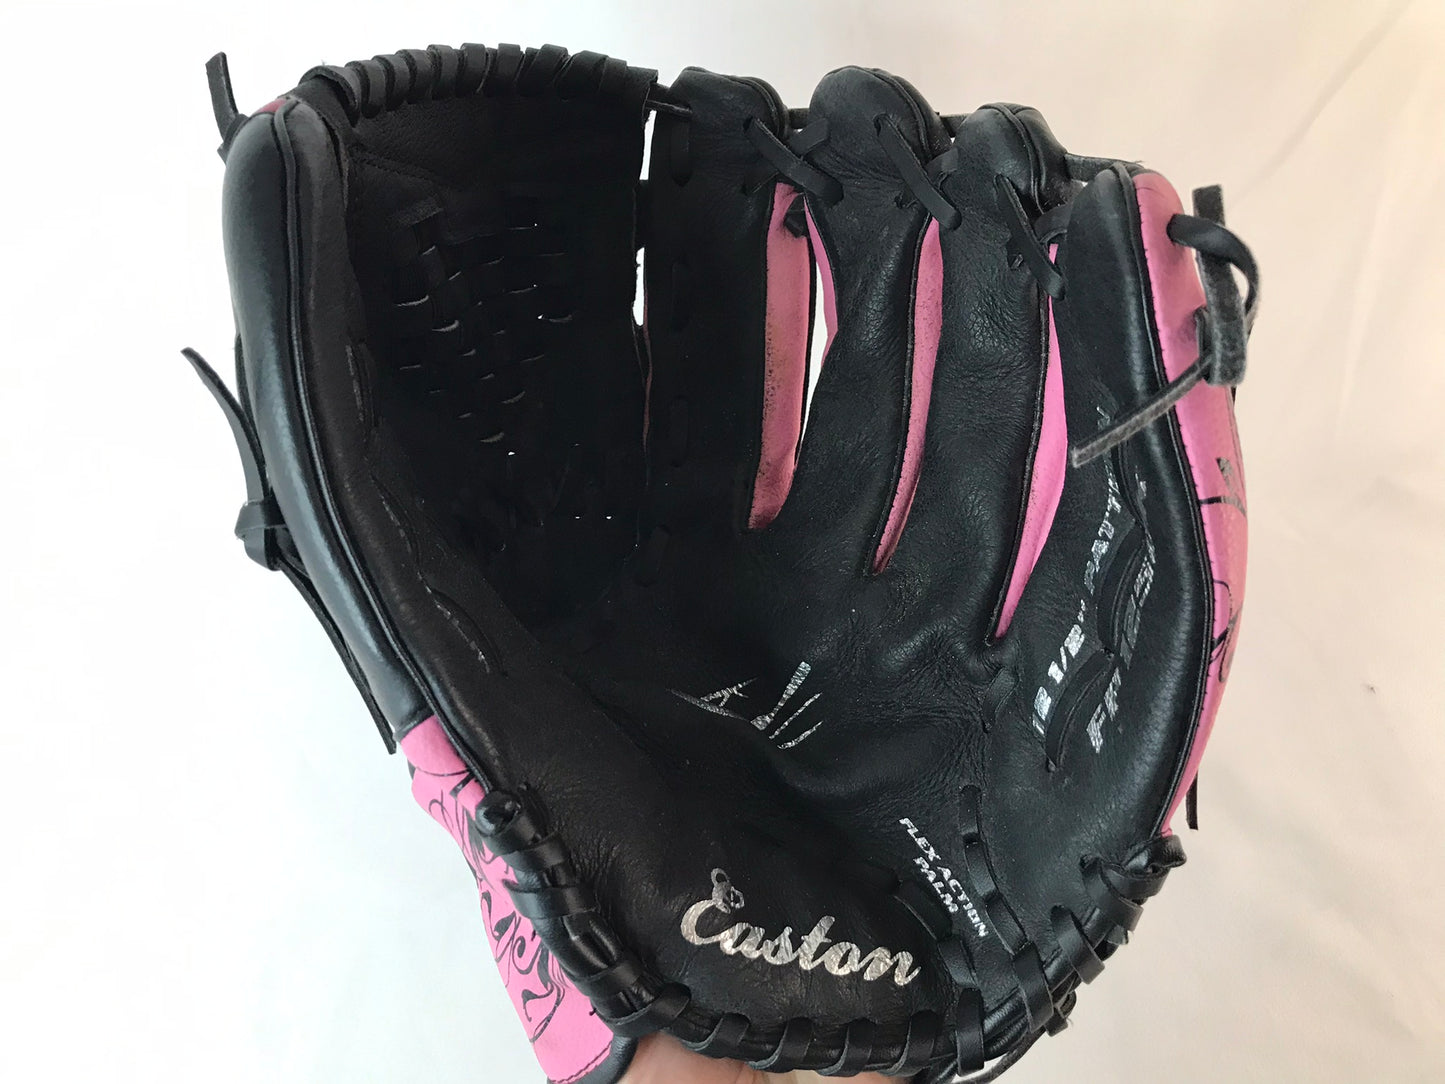 Baseball Glove Adult Size 12.5 inch Easton Pink Black Leather Fits on LEFT Hand Minor Wear